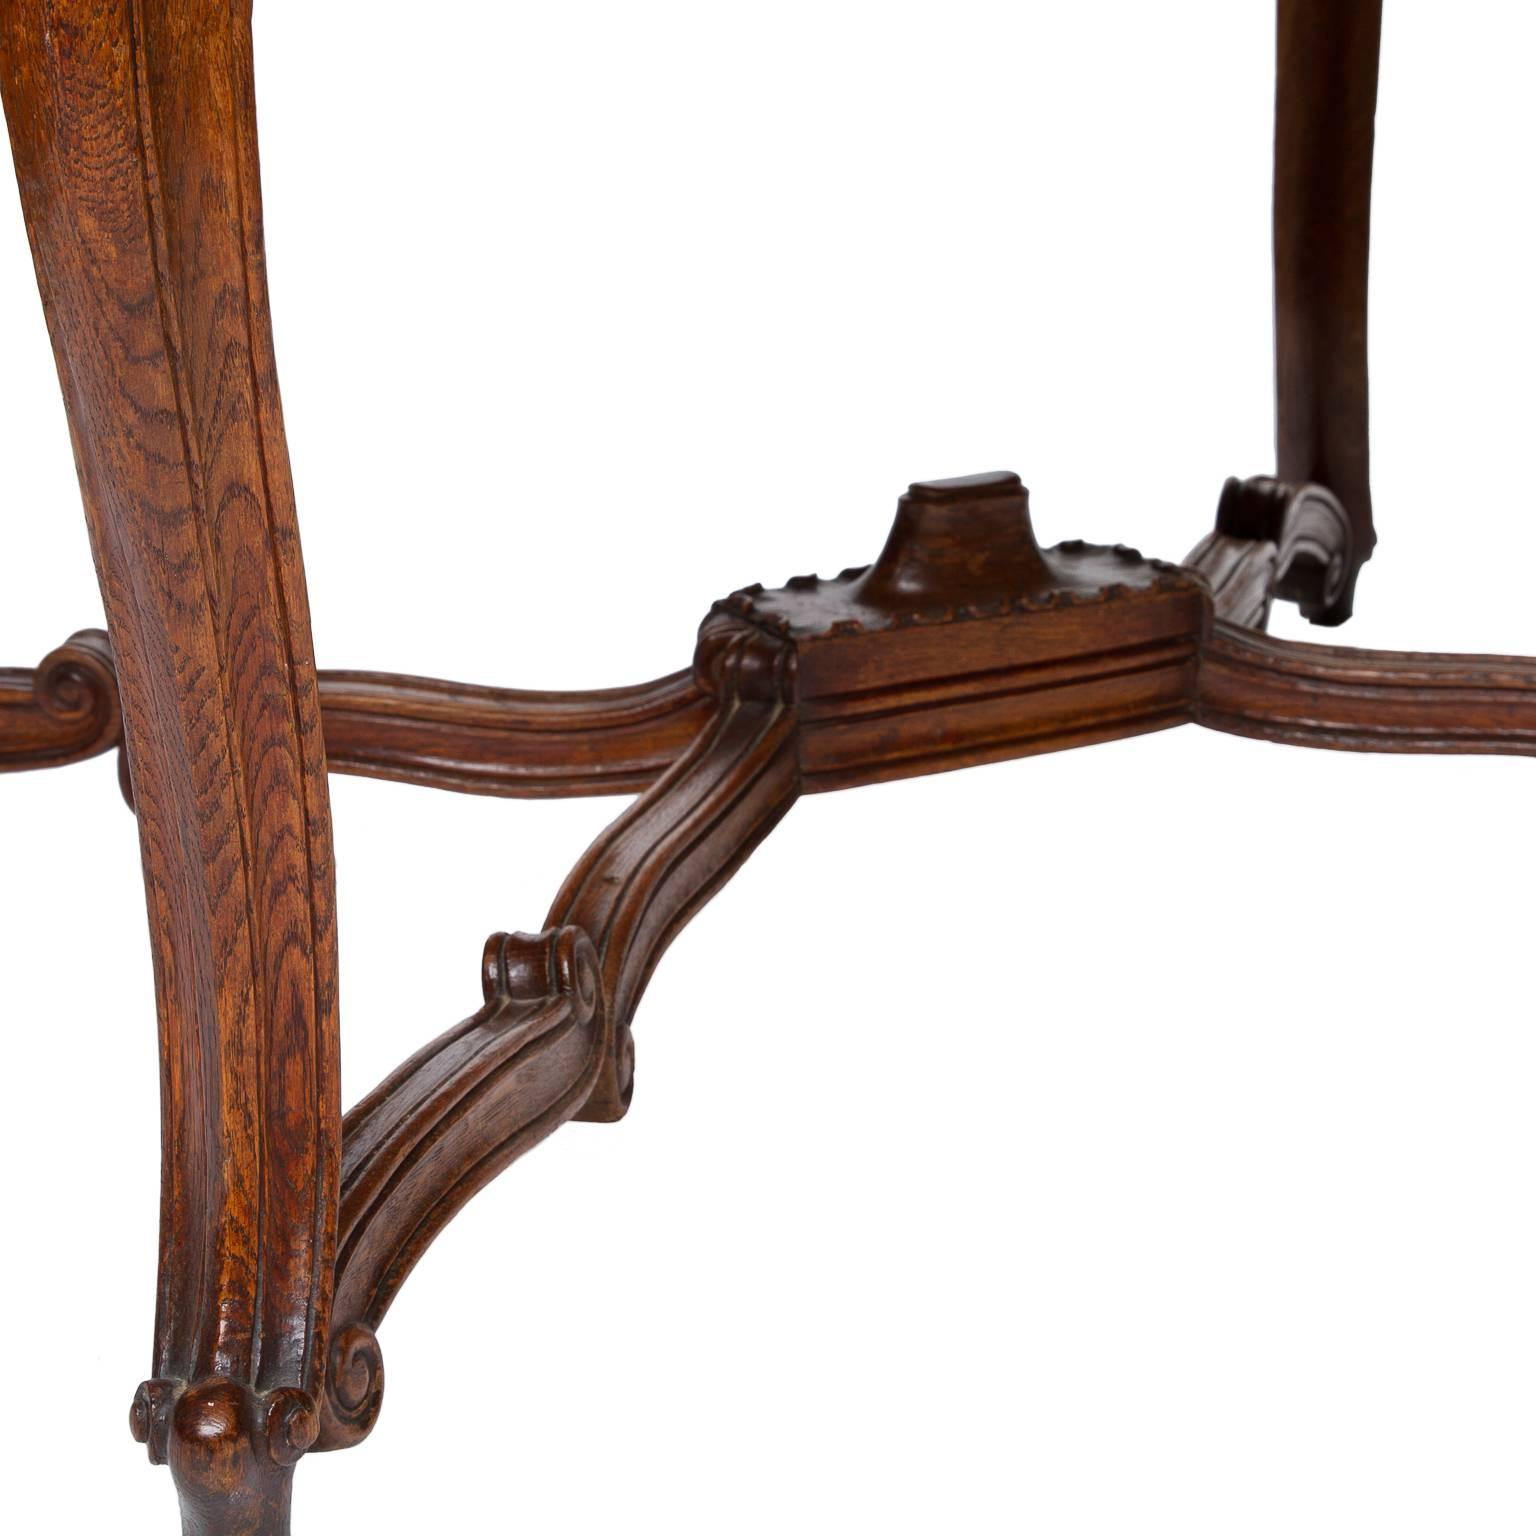 A French country dining table from the Normandy region of France. The Louis XV style dining table has ends that pull-out and will support leaves (no leaves with the table). However closed these ends have nice heavy bronze handles. Parquetry top